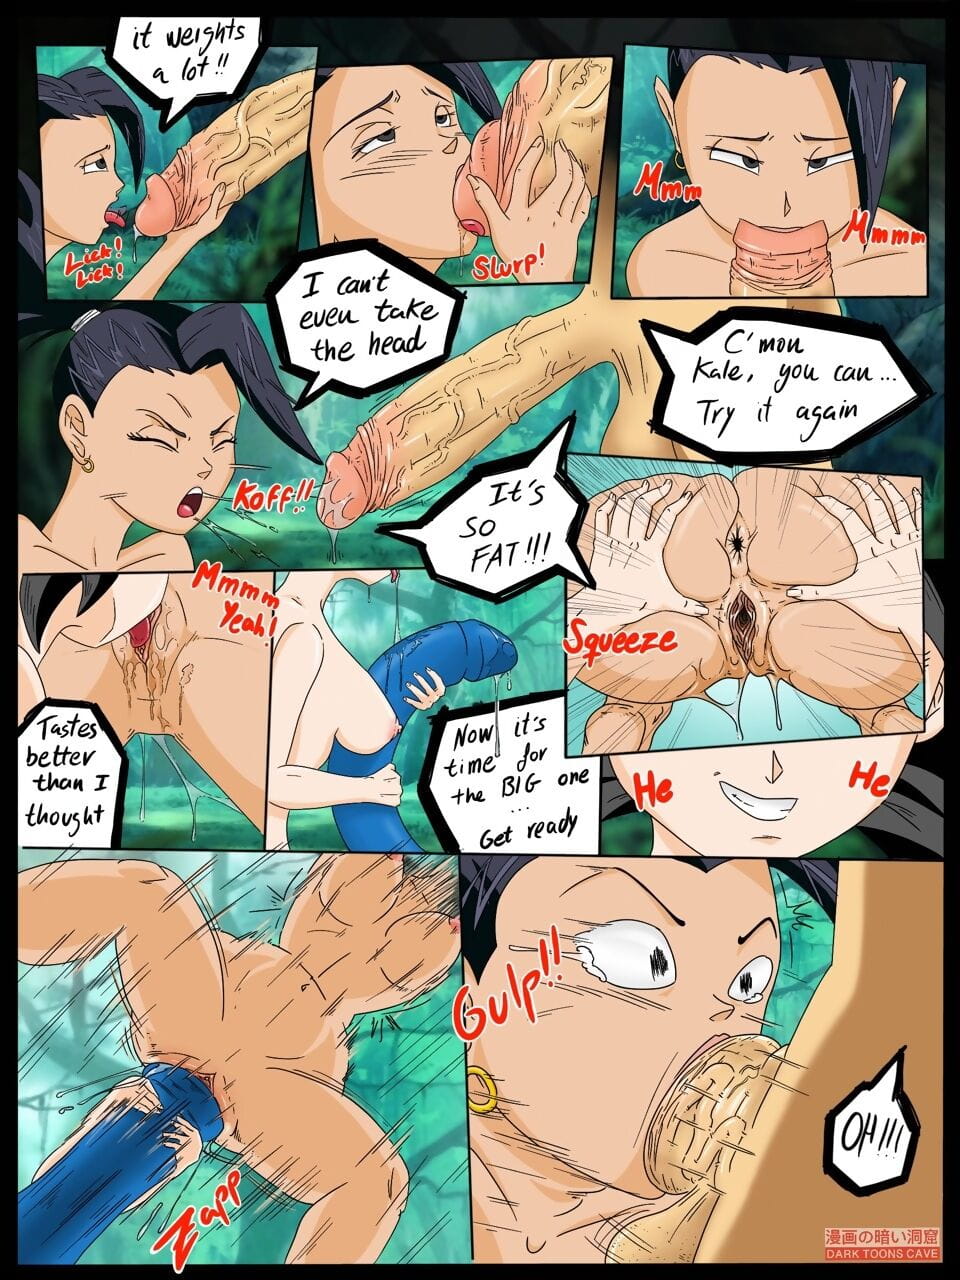 Darktoons Cave- Surpassing the limits page 1